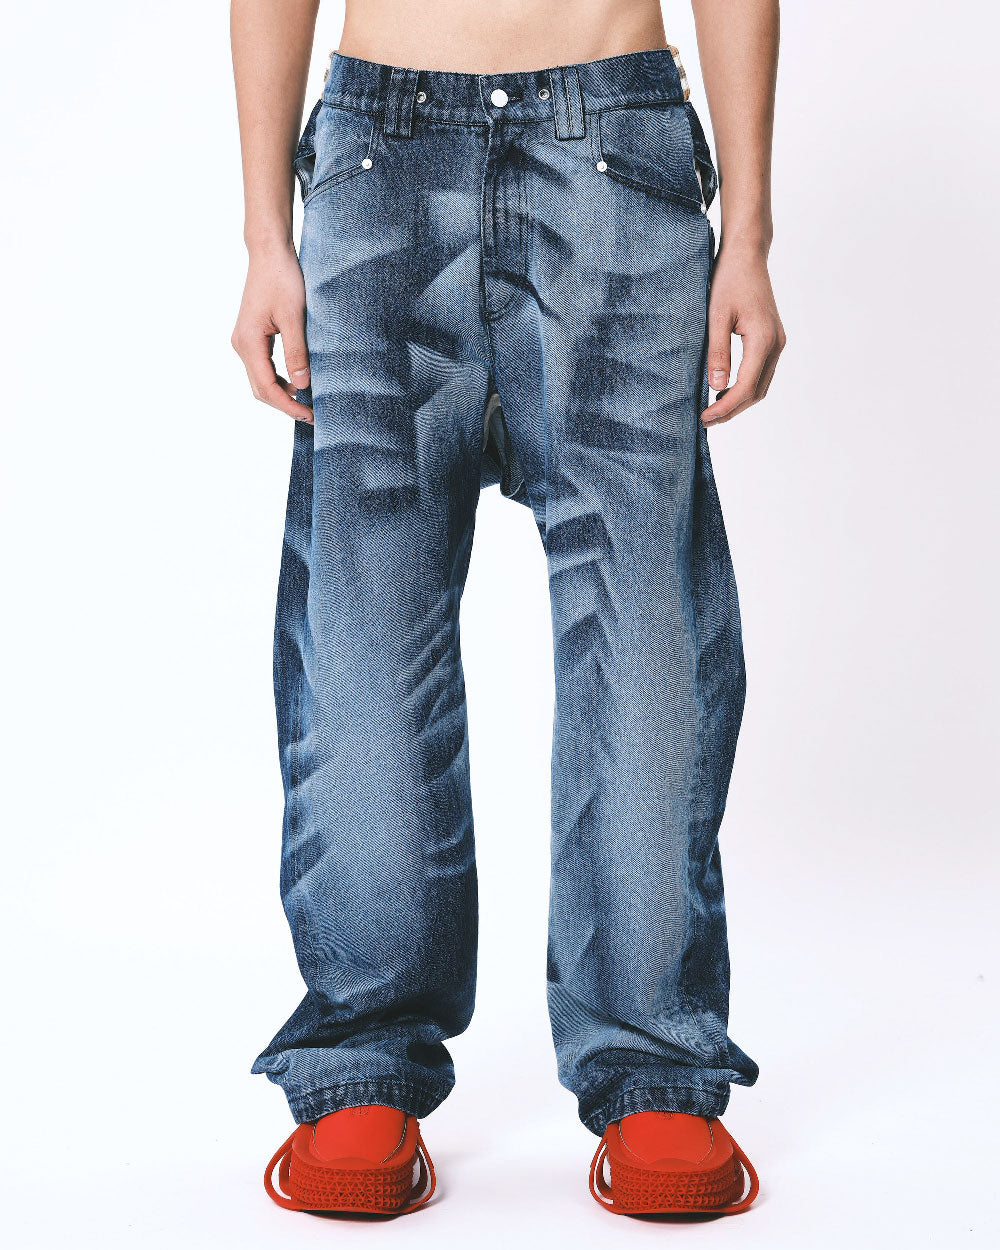 Del Cross Over Low Ride Jeans